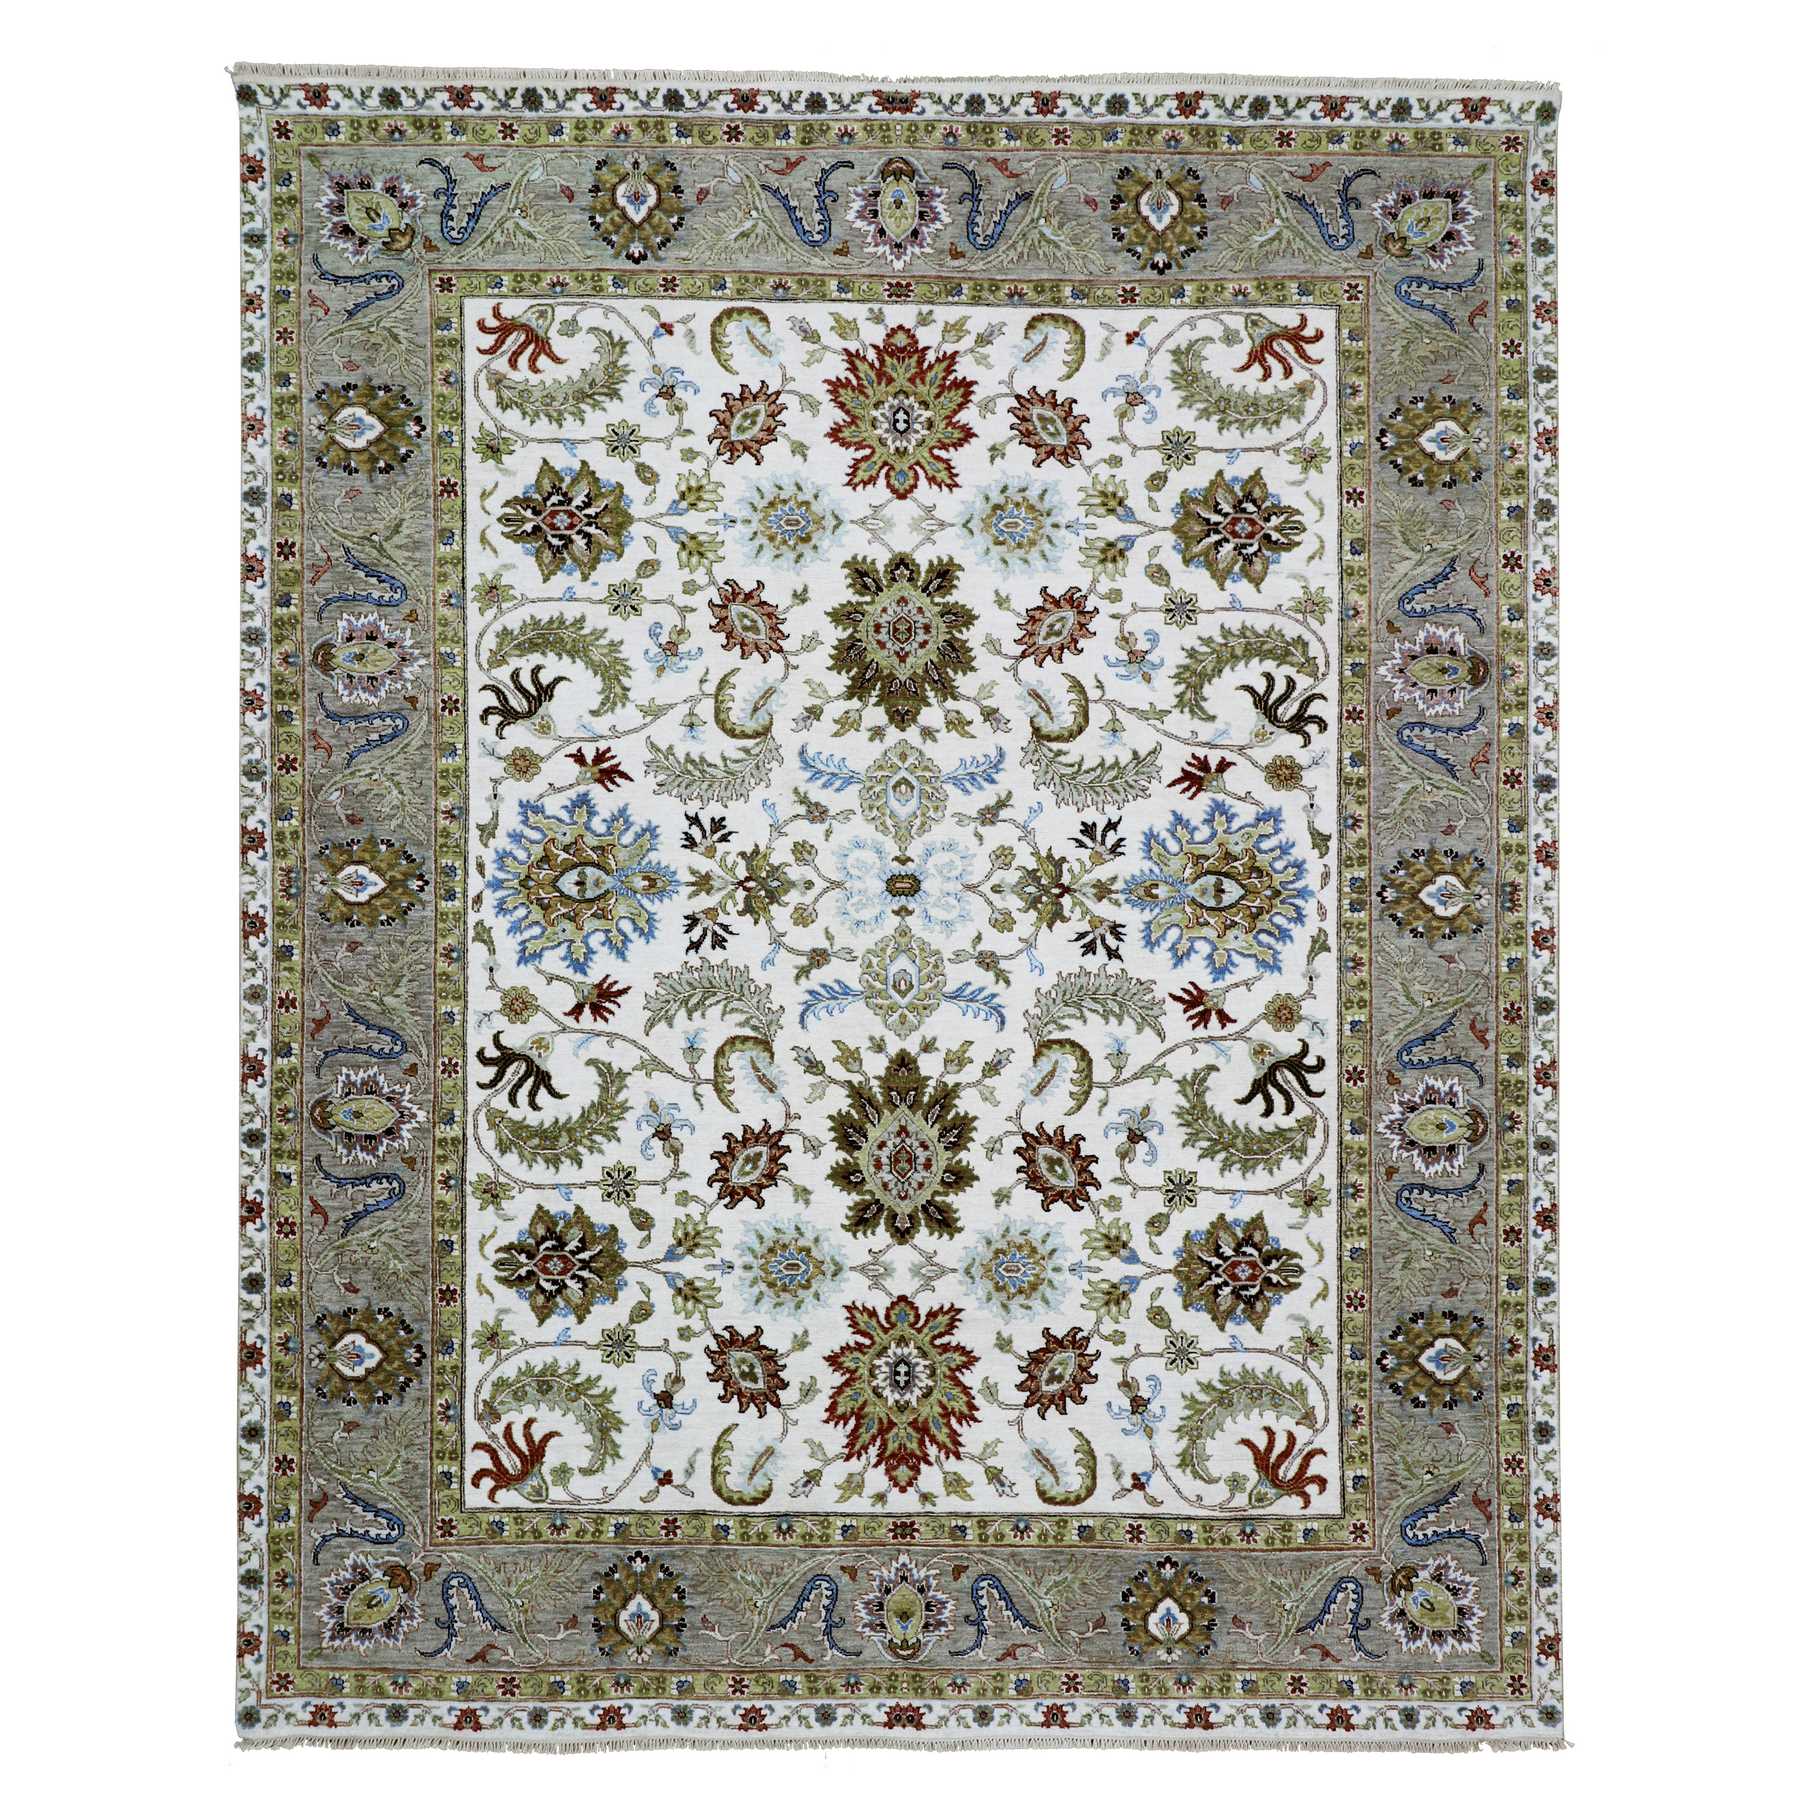 Huron White, Chocolate Brown Border, Agra Scroll and Large Leaf Design, Hand Knotted Vegetable Dyes, Natural Wool Oriental Rug